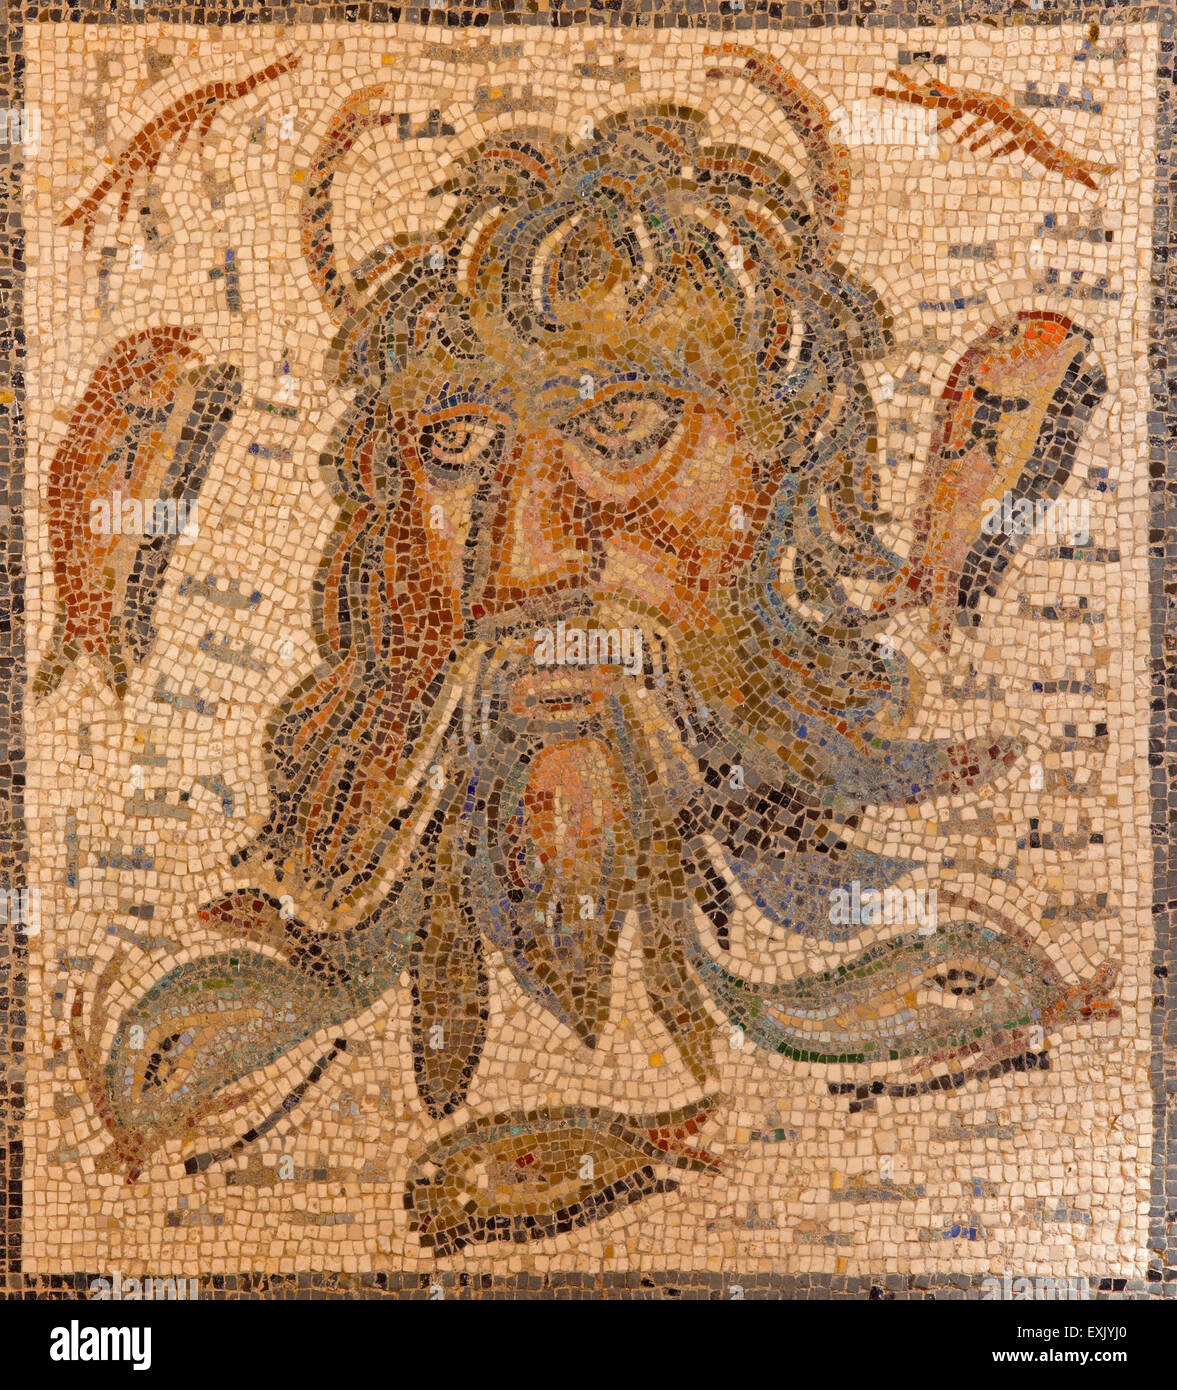 CORDOBA, SPAIN - MAY 25, 2015: The ancient roman mosaic of gon Oceanus from 2 - 3 cent. in Alcazar de los Reyes Cristianos castl Stock Photo